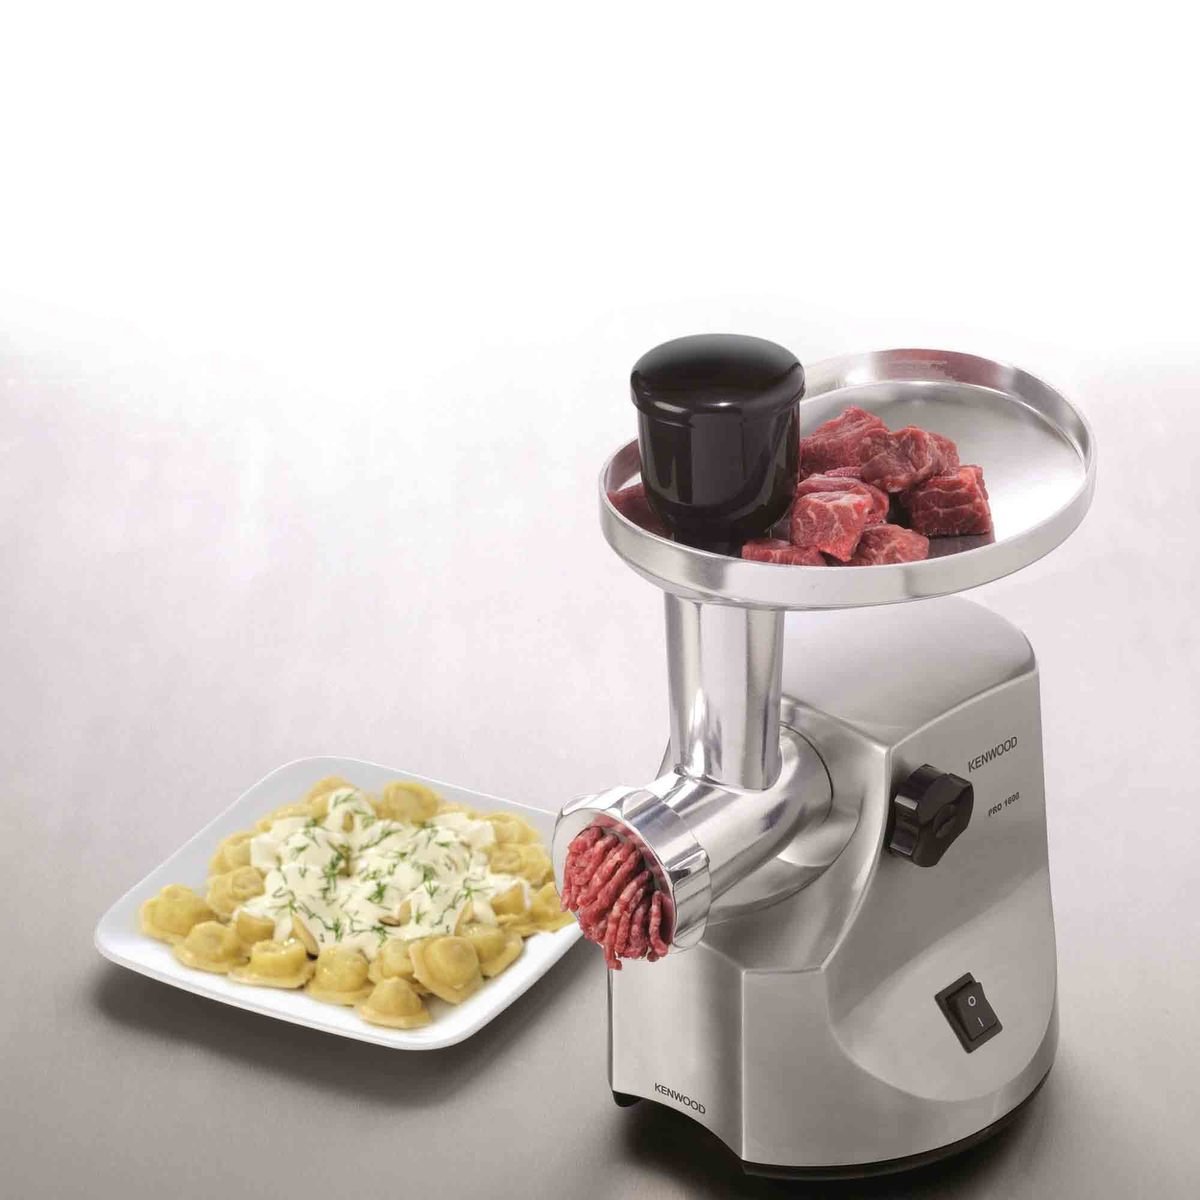 Kitchen Tools Manual Meat Grinder Hand Operated Beef Noodle Pasta Mincer  Sausages Maker Gadgets Aluminum Grinding Machine - China Food Processor,  Food Processor with Meat Grinder